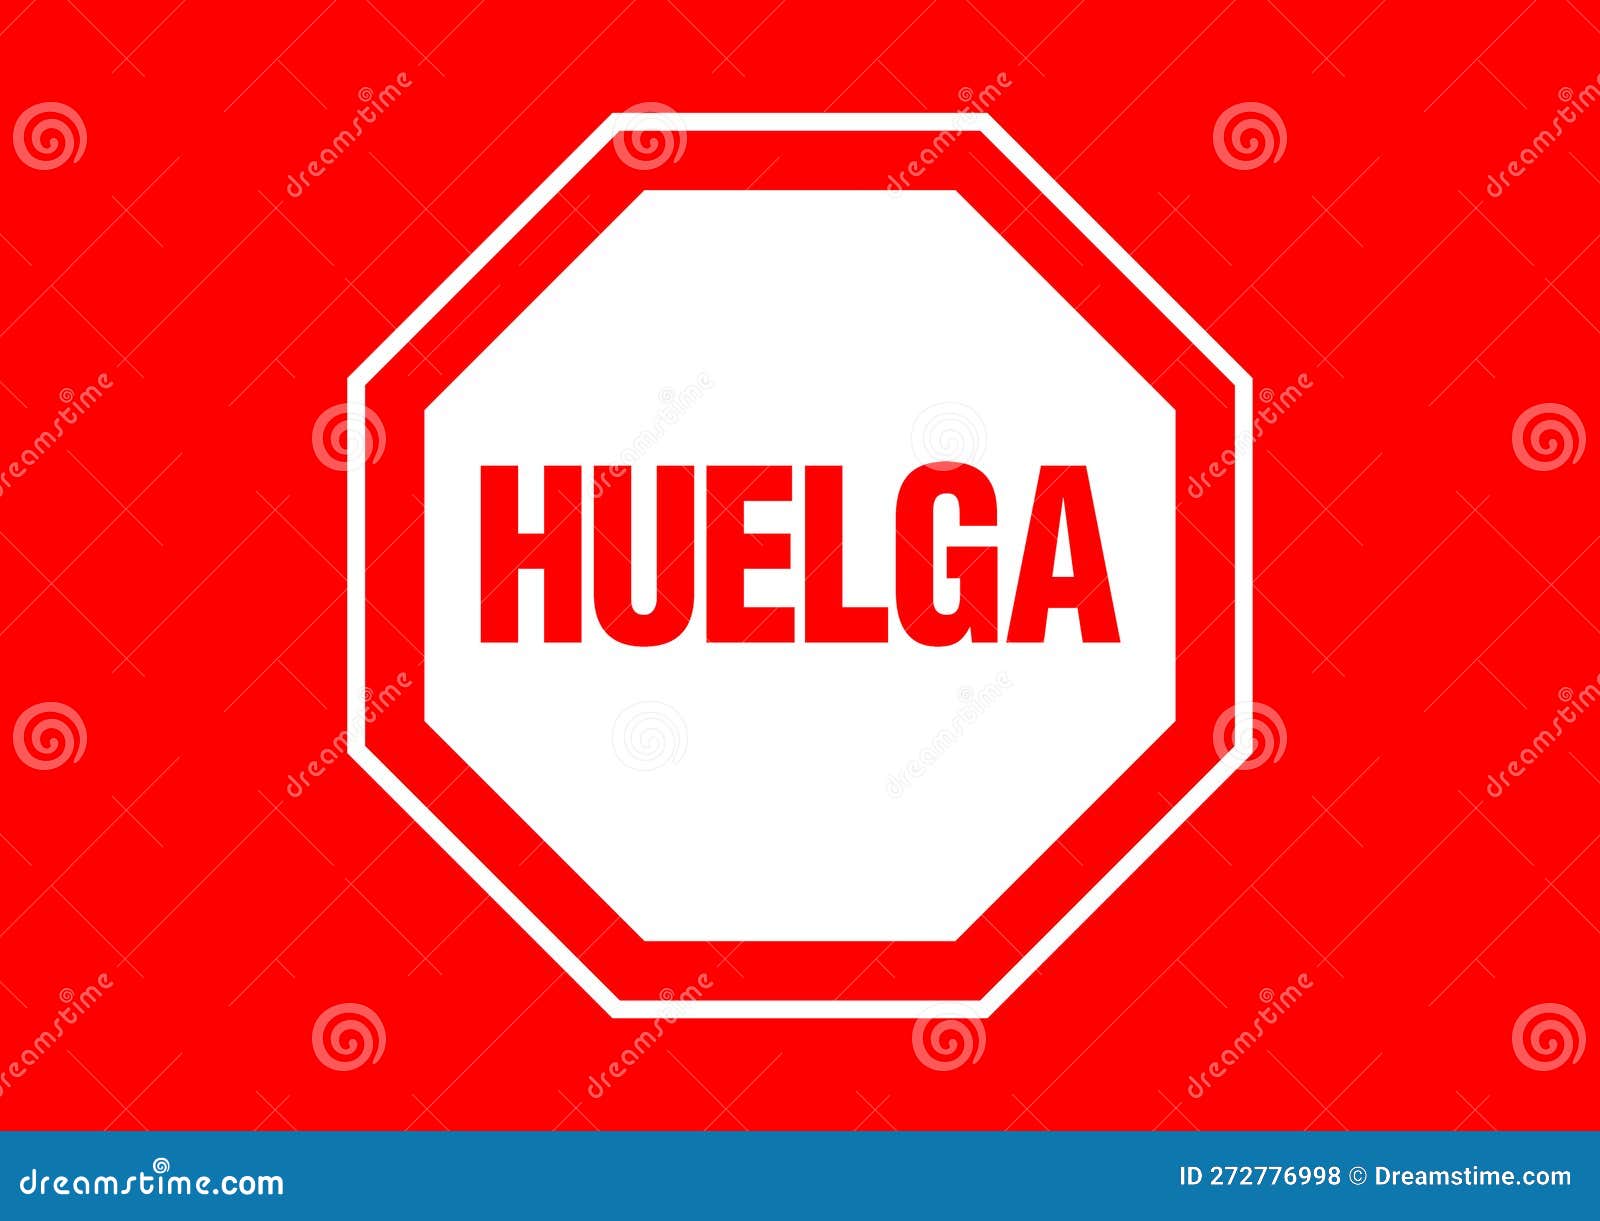 huelga - graphic for a poster in spanish